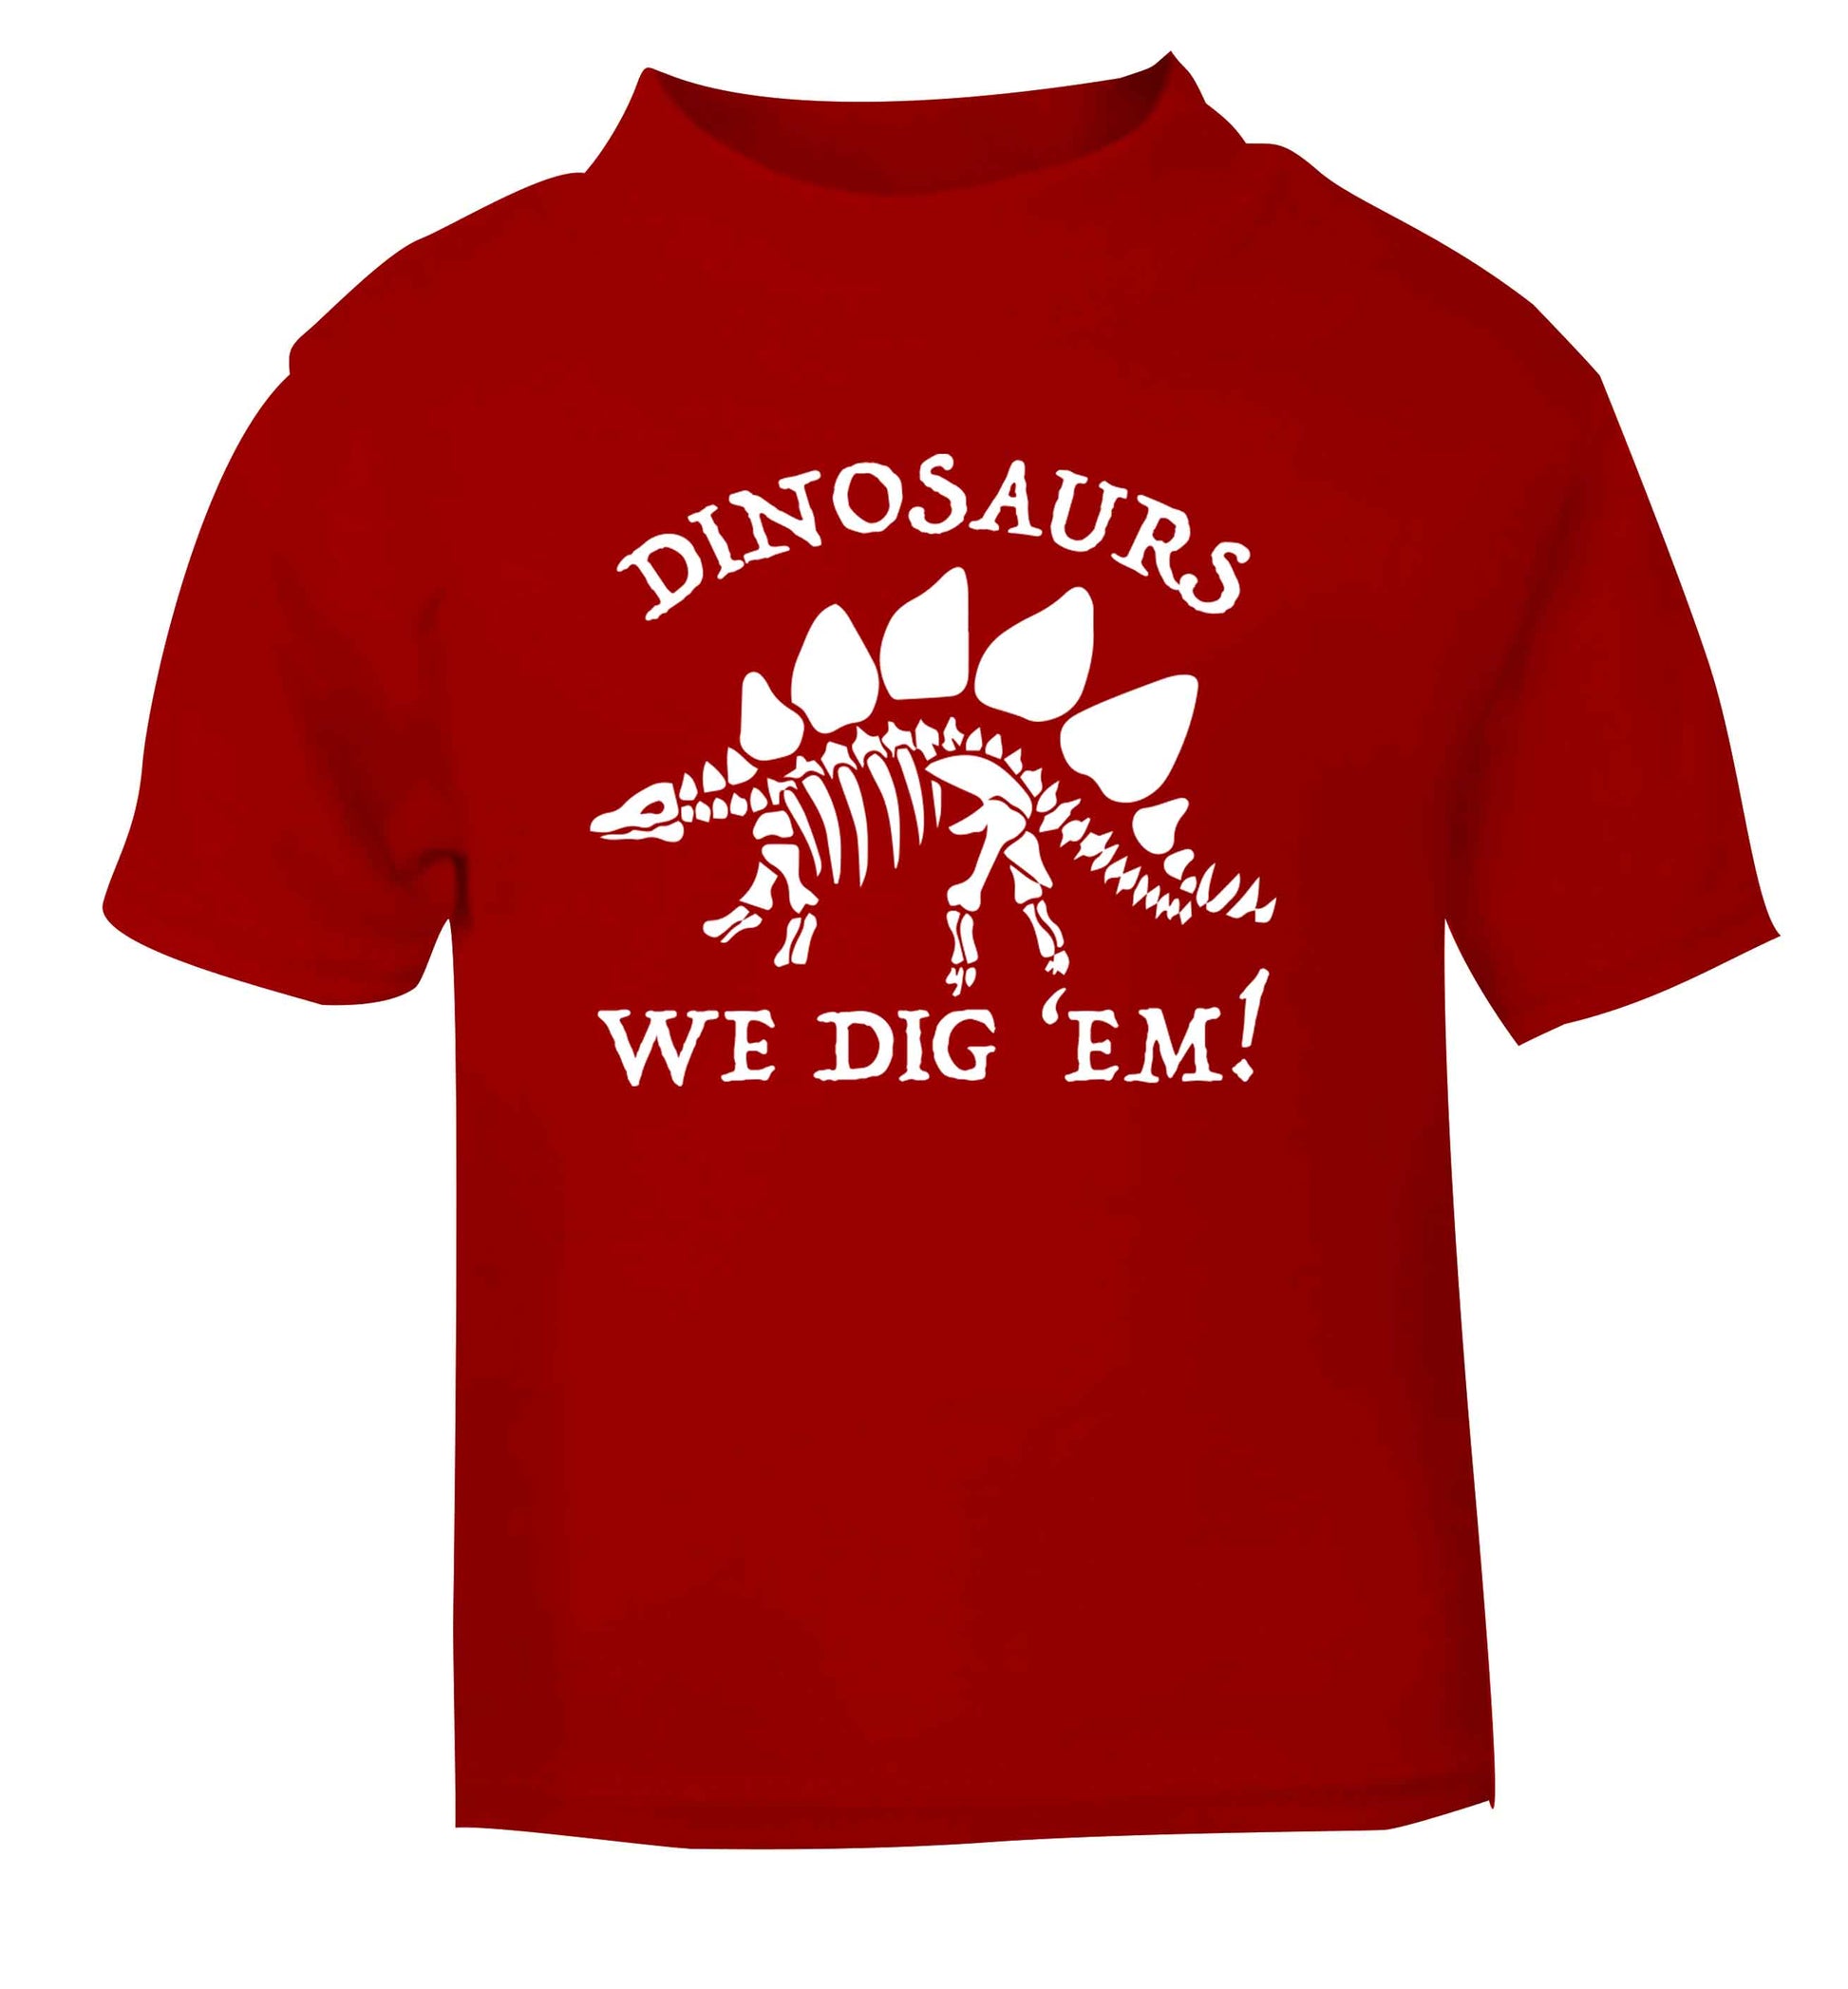 Dinosaurs we dig 'em! red Baby Toddler Tshirt 2 Years